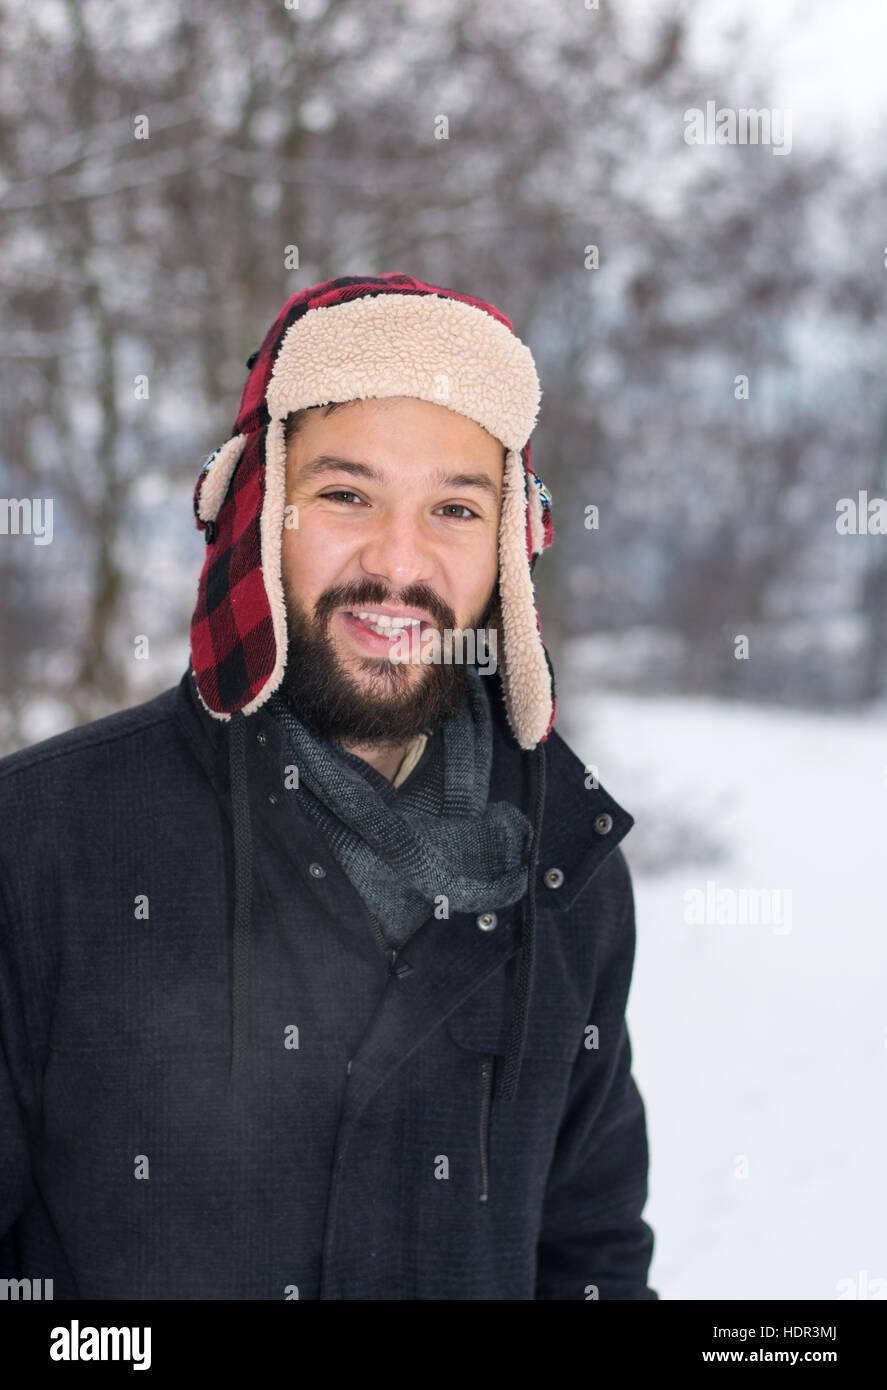 Happy man standing outdoors while it is snowing Stock Photo